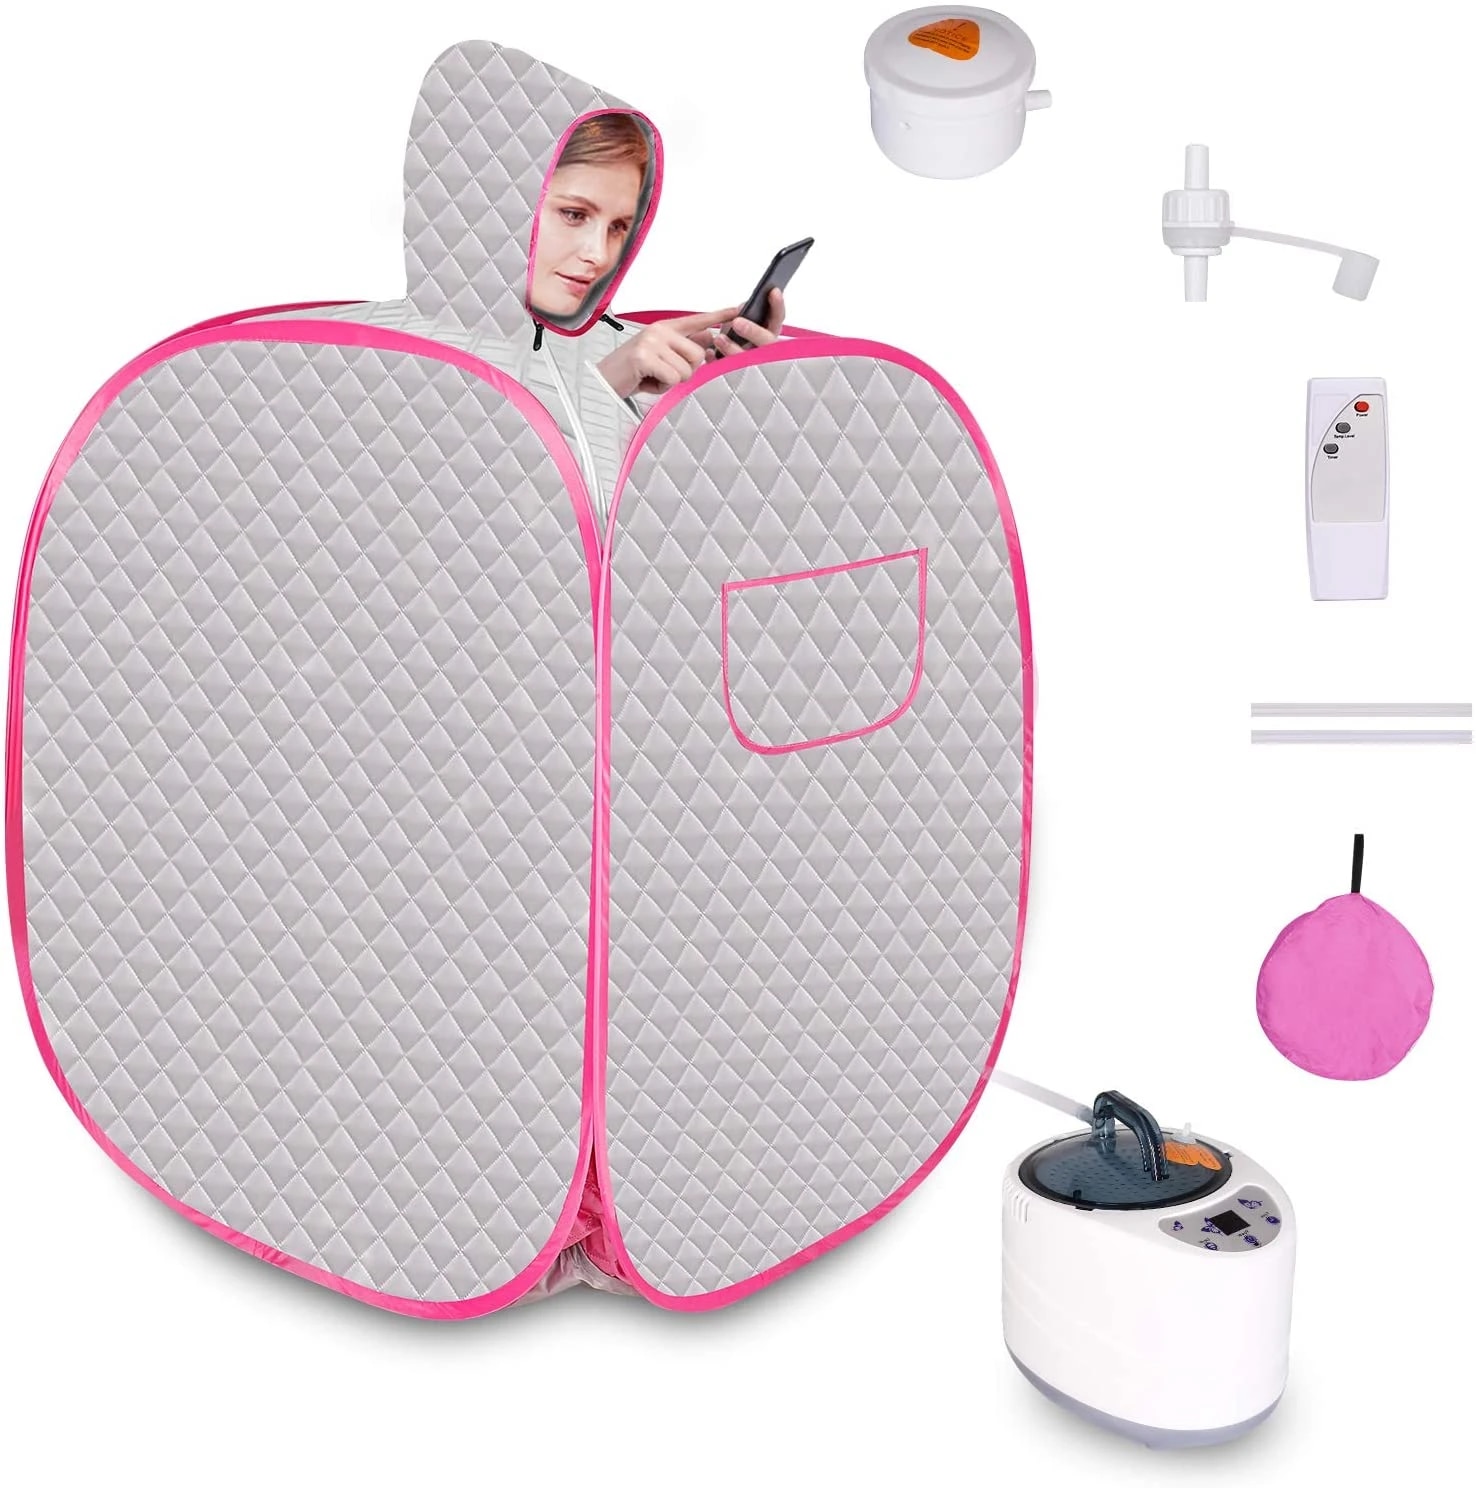 Portable Saunas From Aliexpress – A Relaxing Way To Enjoy Your Home